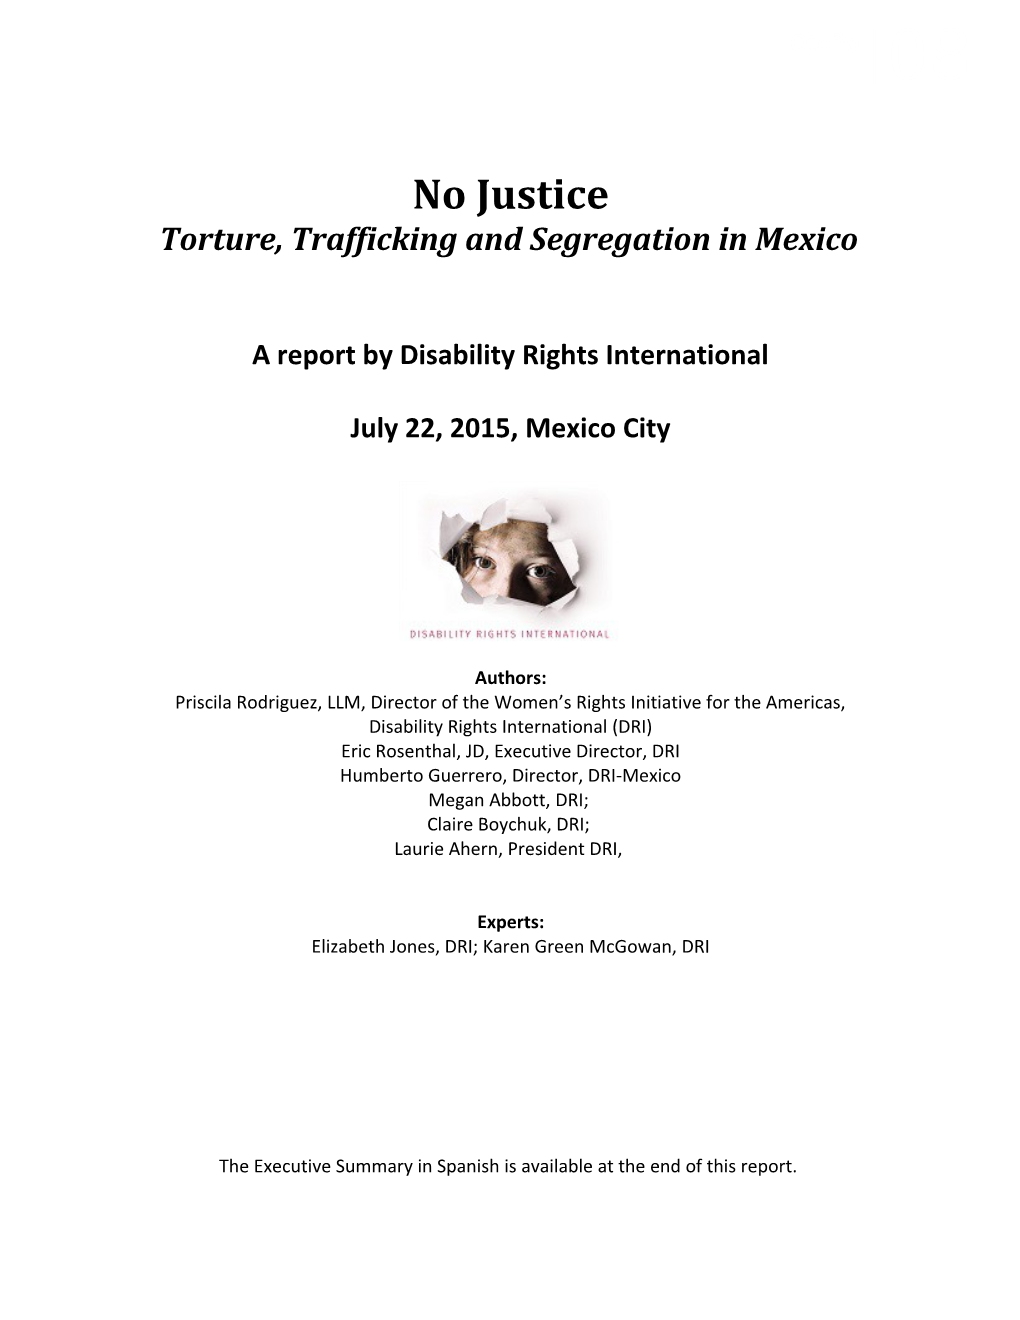 Torture, Trafficking and Segregation in Mexico